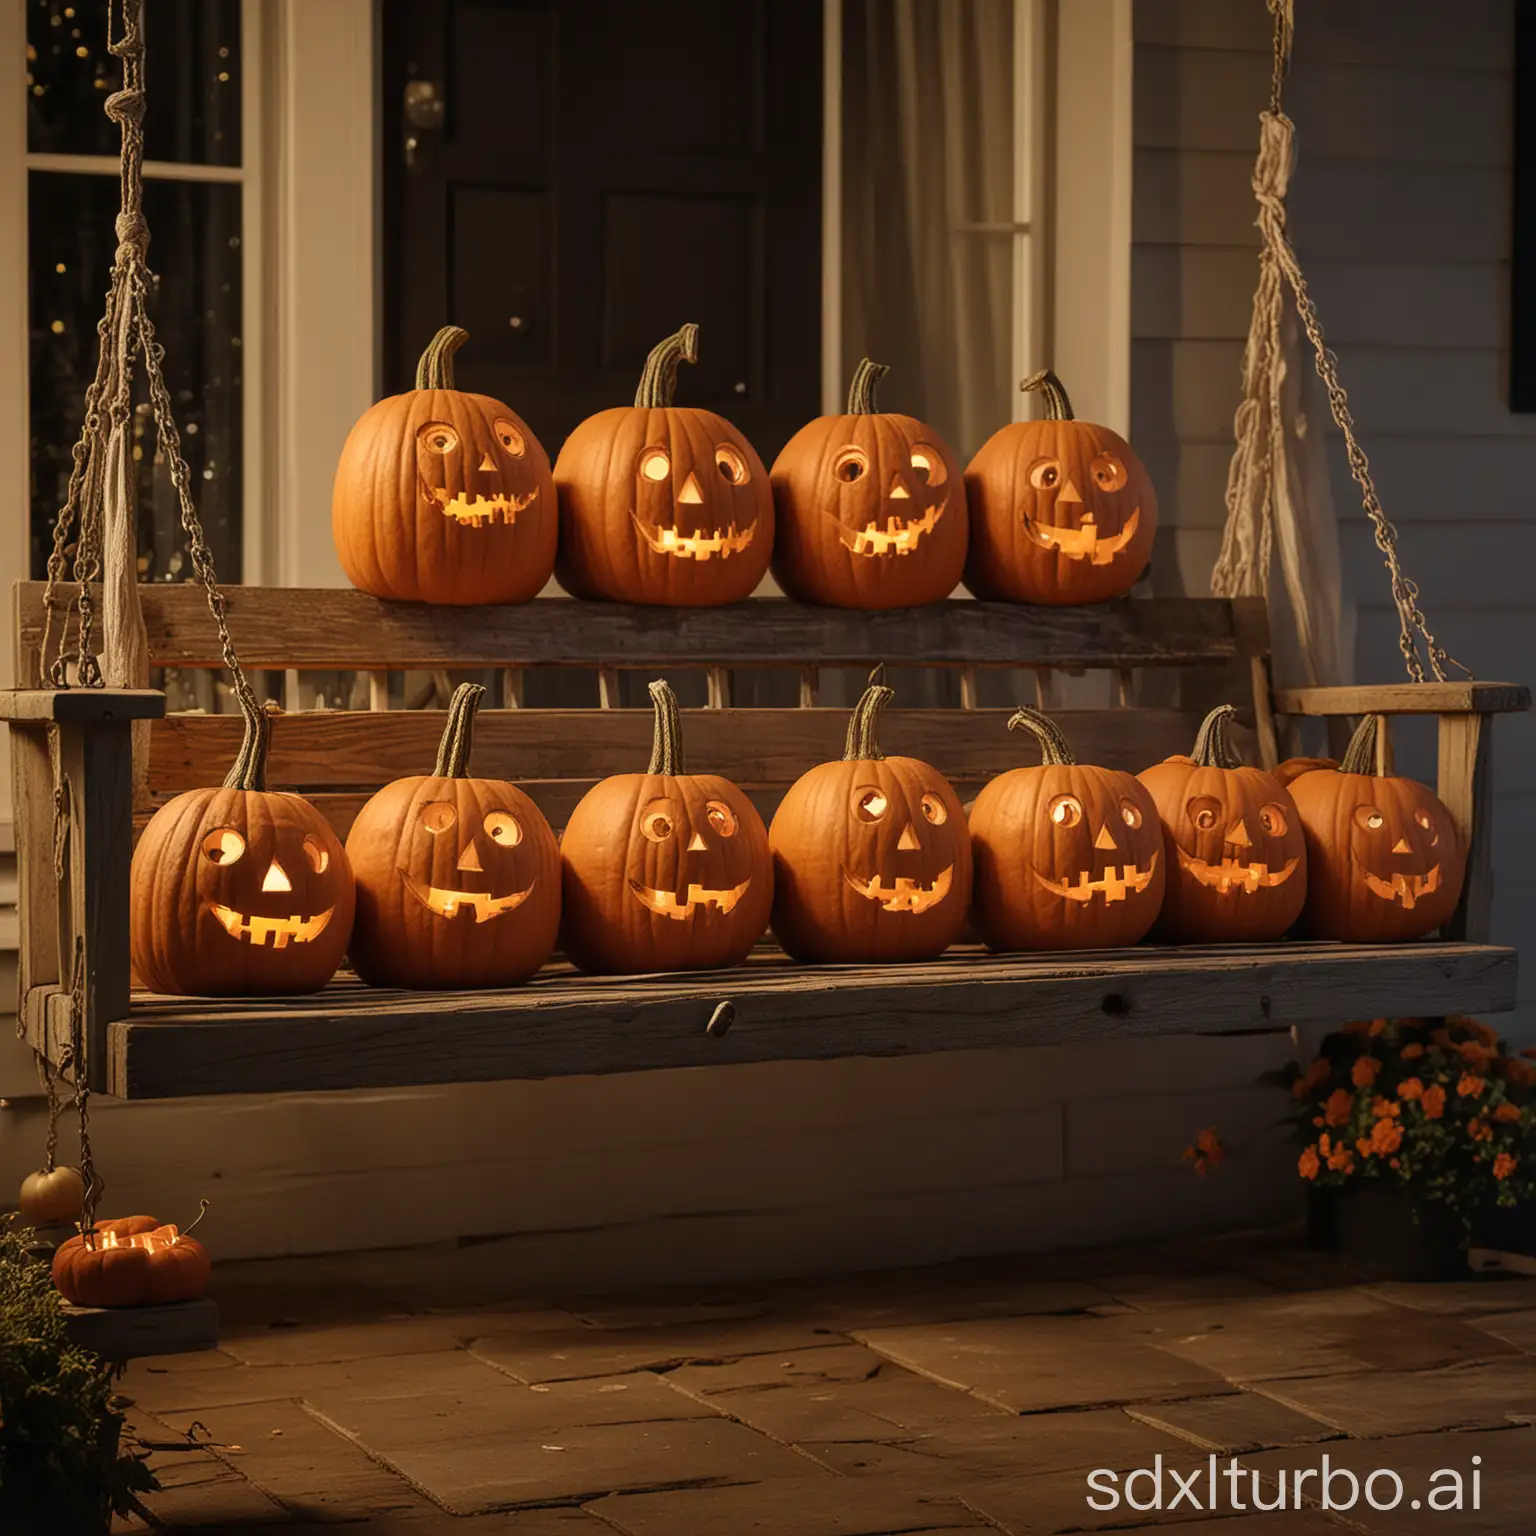 Cozy-Night-on-the-Porch-Swing-with-Pumpkins